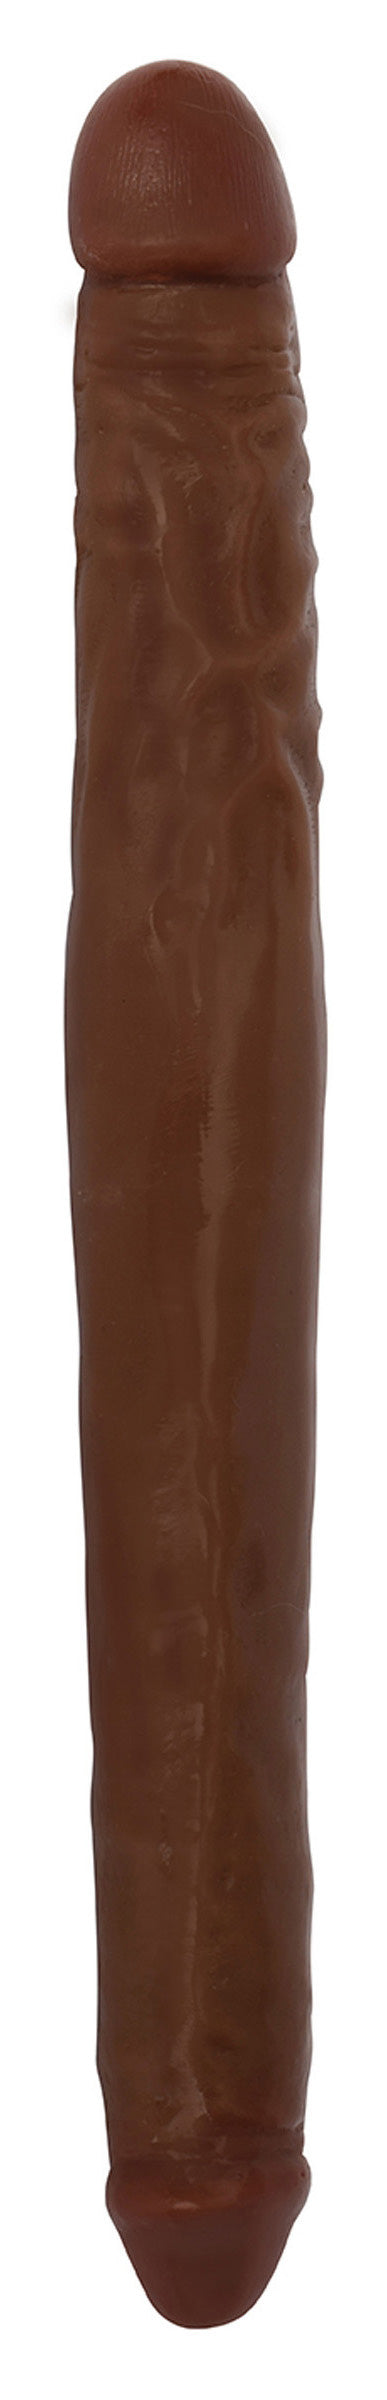 JOCK 16 Inch Tapered Double Dong Brown Dildos from Jock